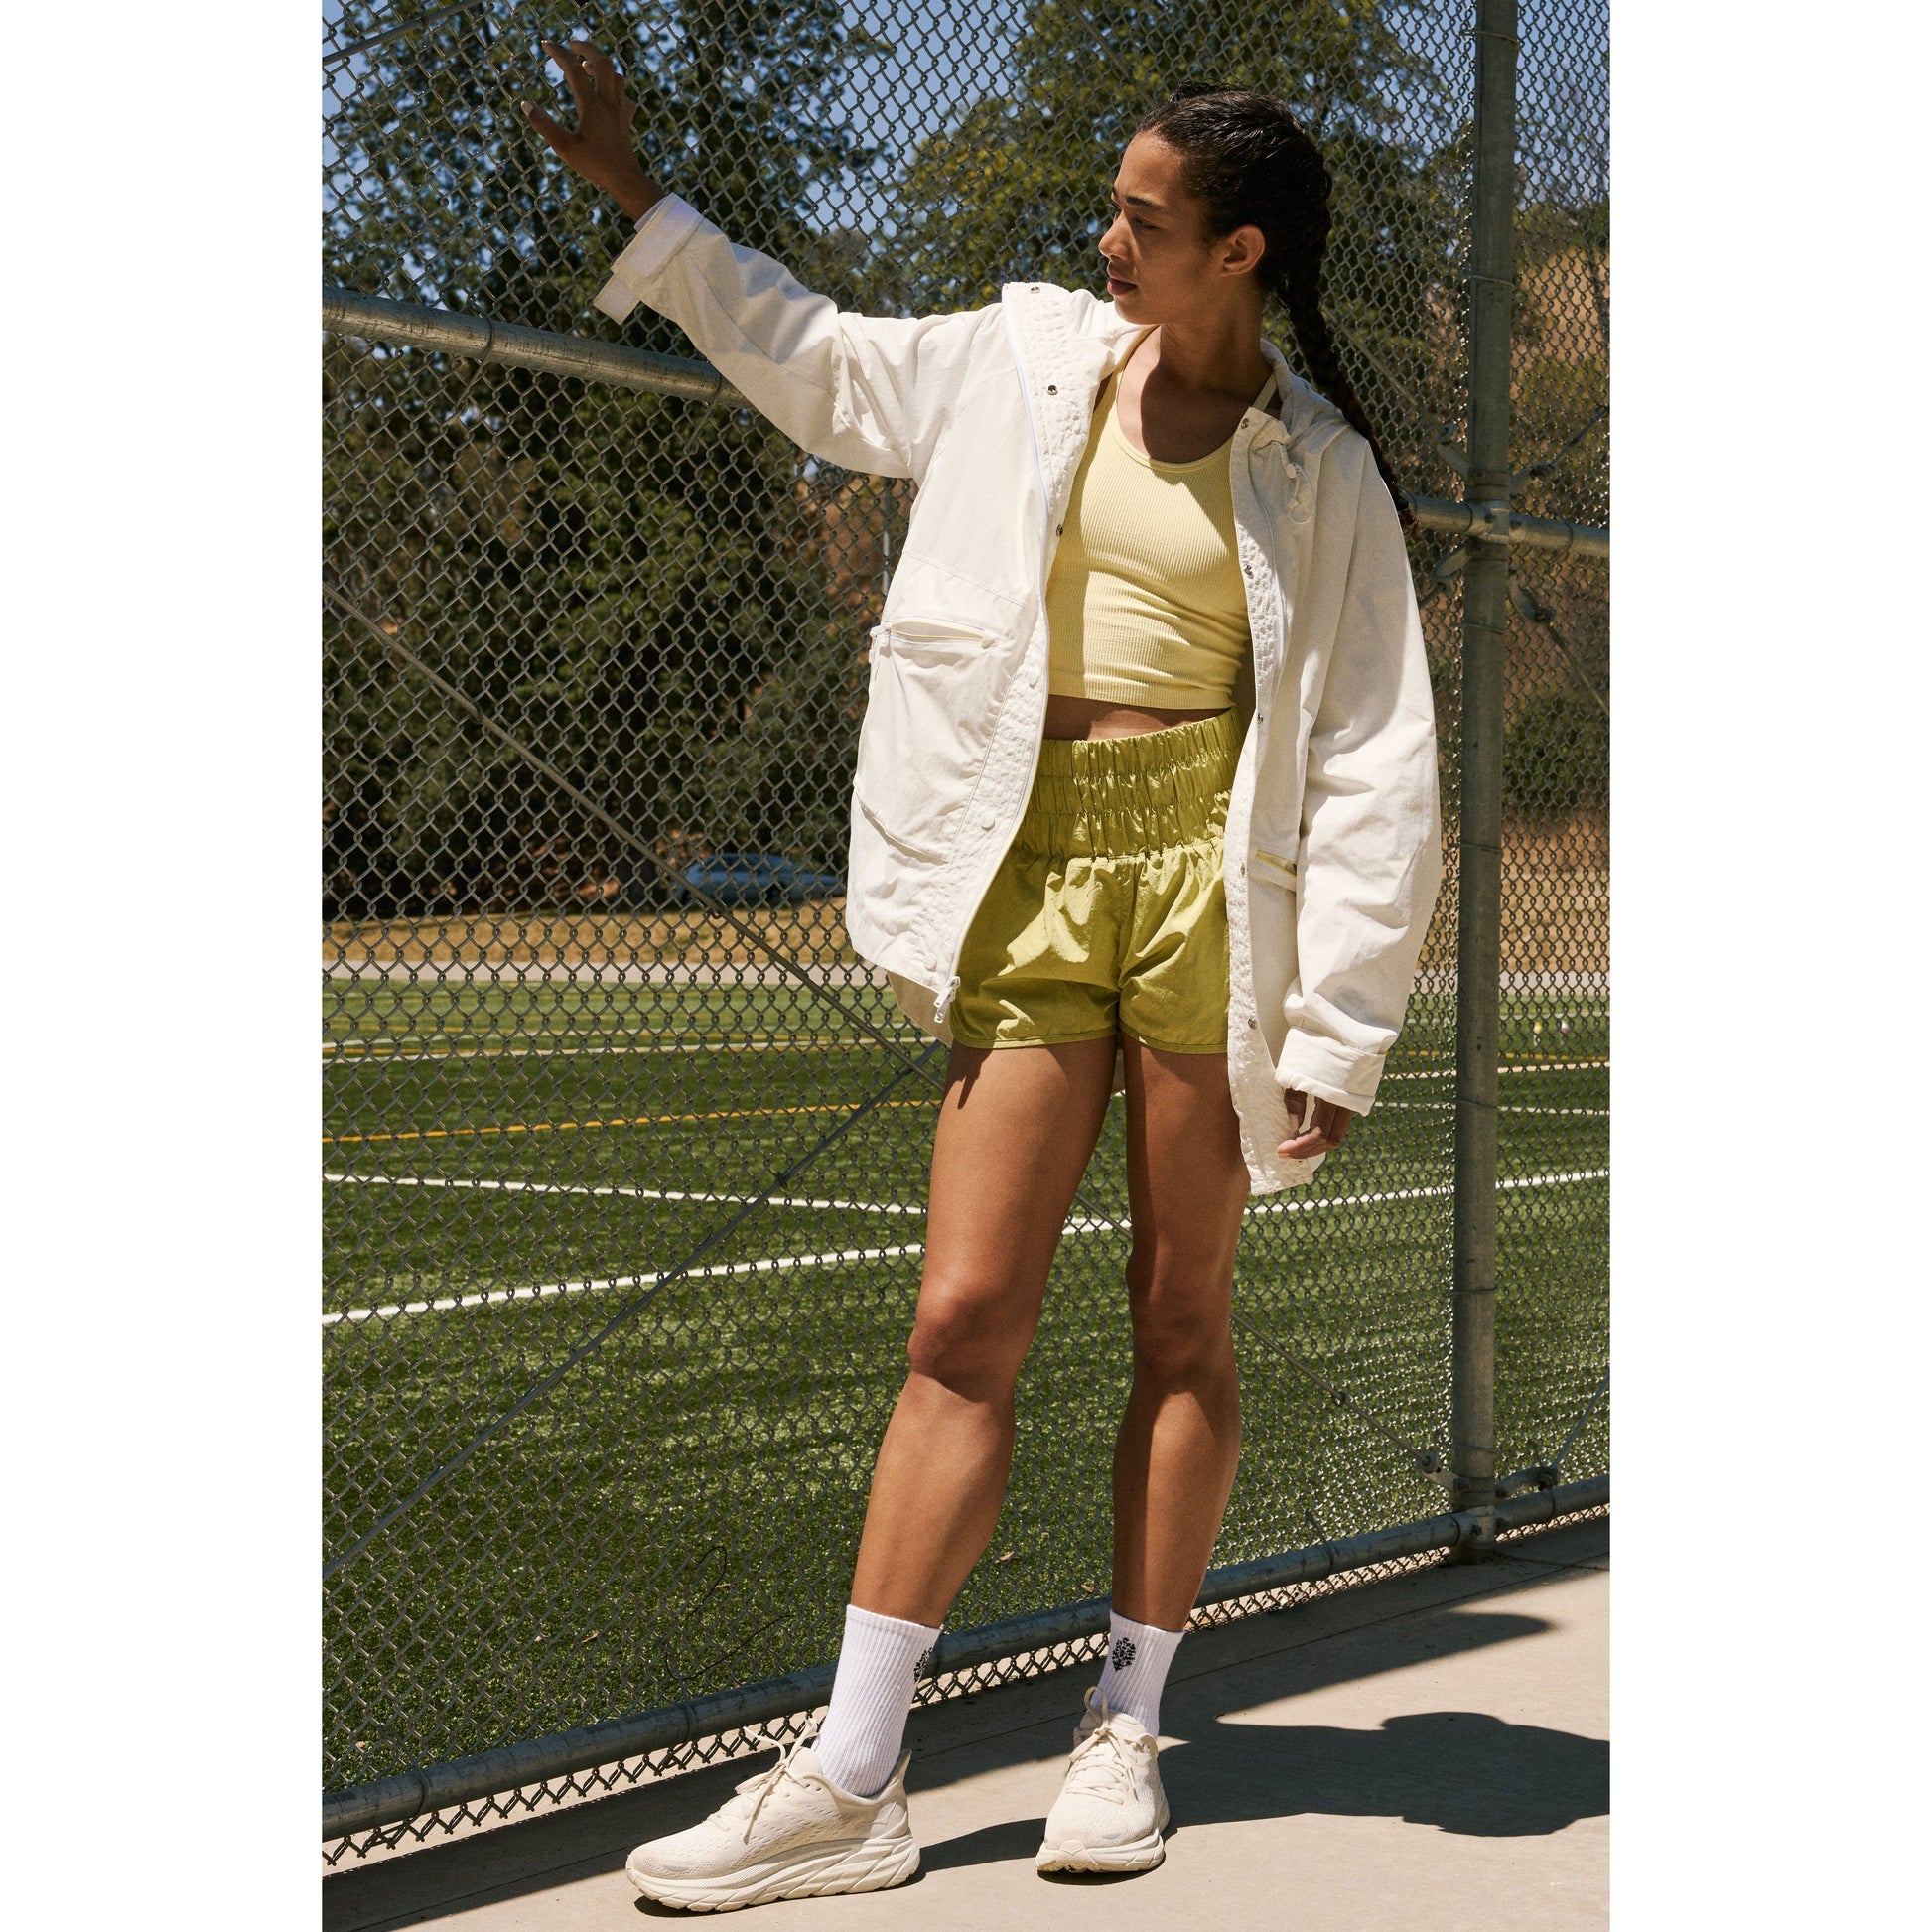 A young woman in sporty attire stands on a tennis court, raising her hand to shield her eyes from the sun. She wears a Singin in the Rain Jacket, Painted White by Free People Movement, ideal for unpredictable weather.